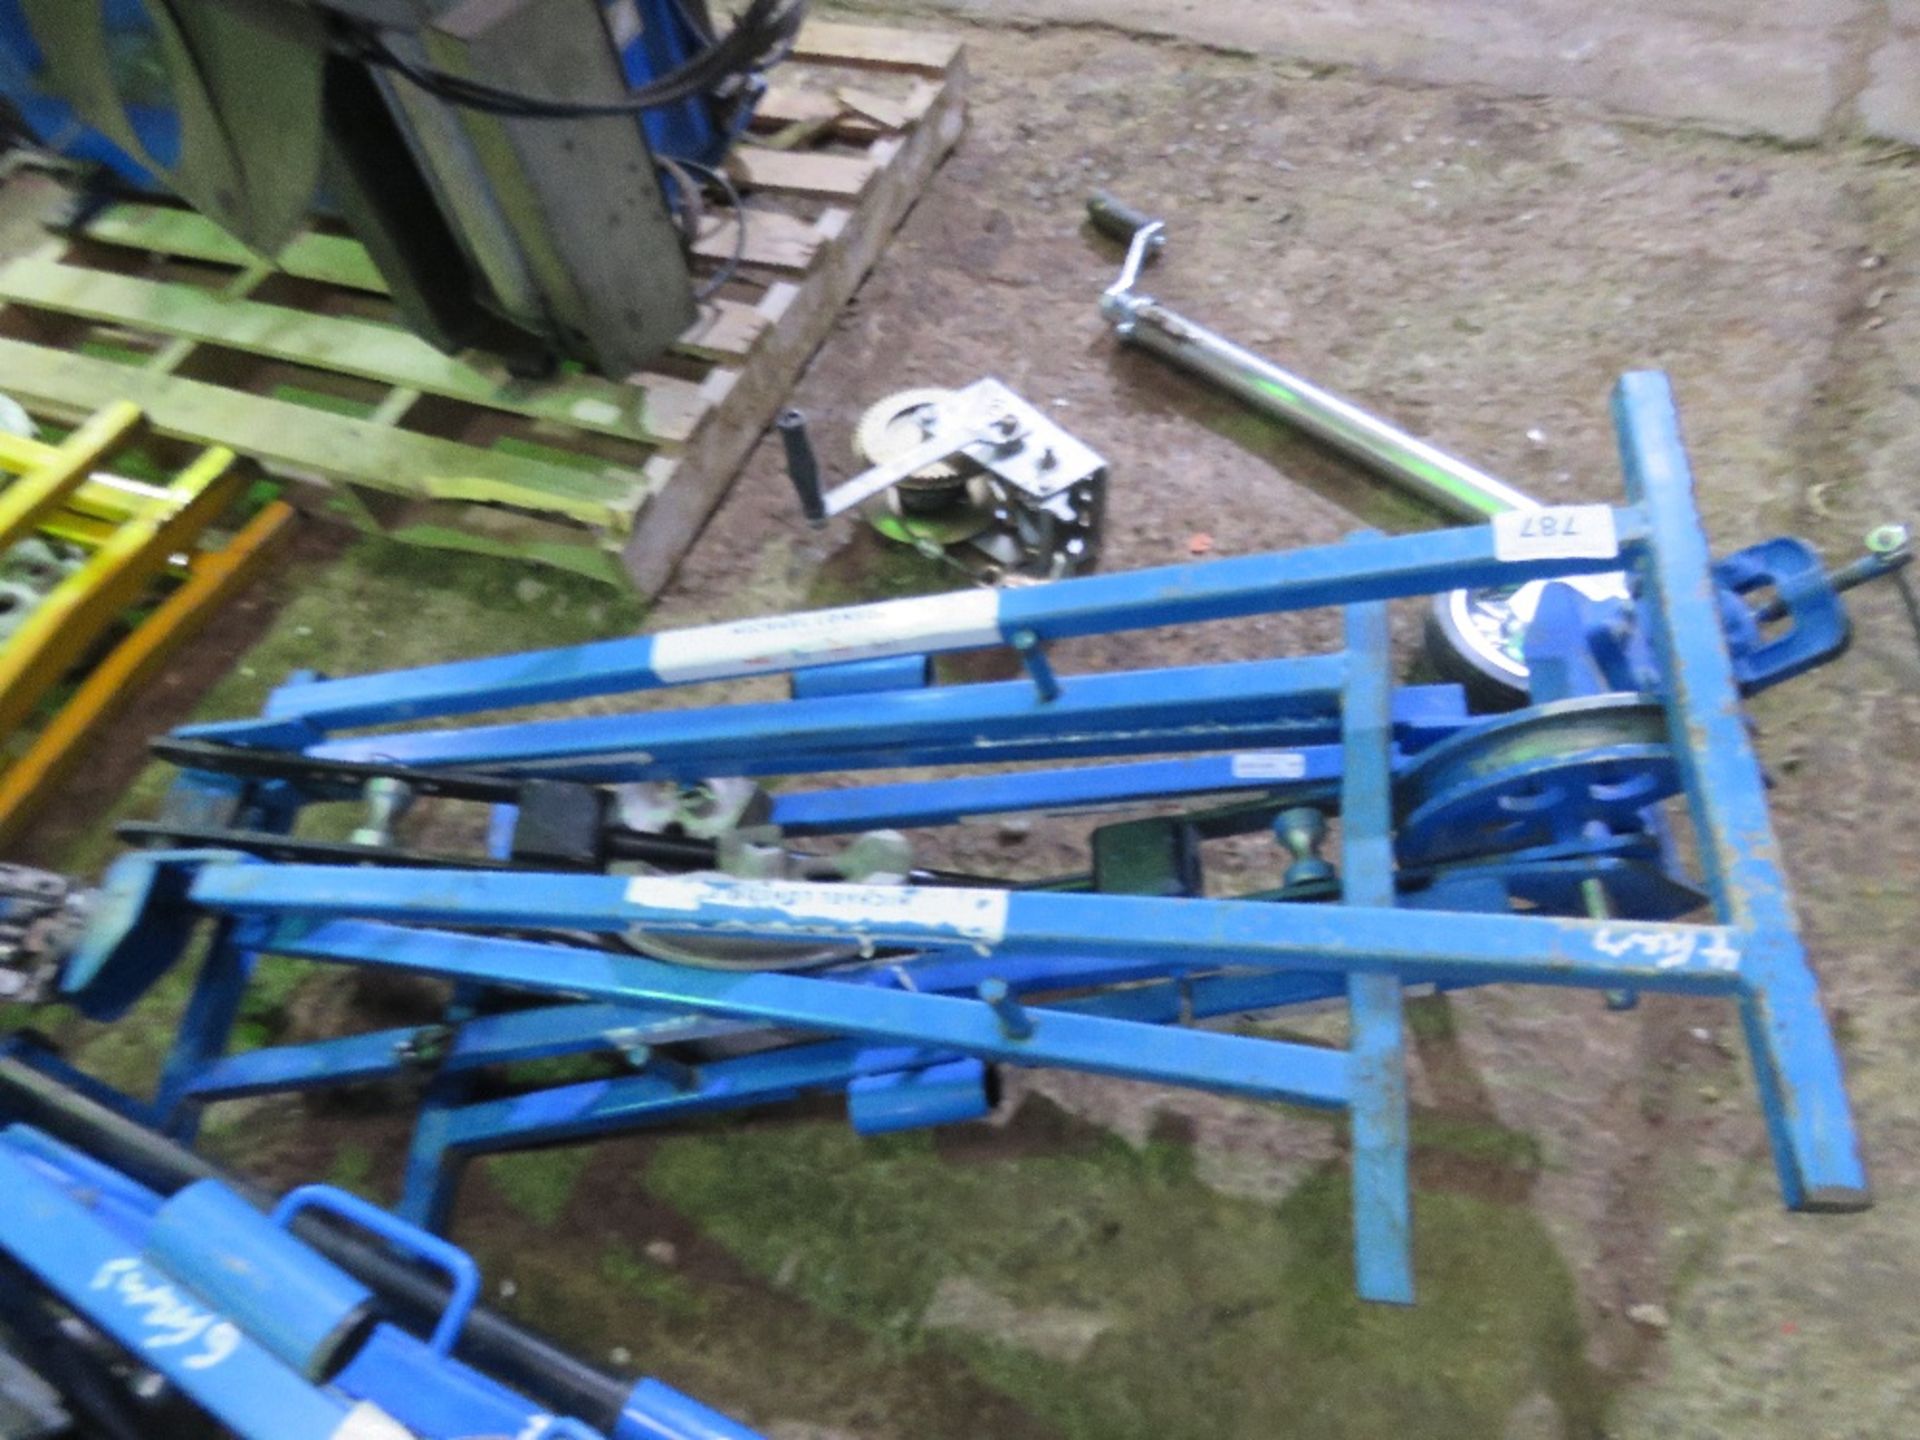 2X PIPE BENDING STANDS WITH 4 FORMS SOURCED FROM LARGE CONSTRUCTION COMPANY LIQUIDATION. - Image 3 of 4